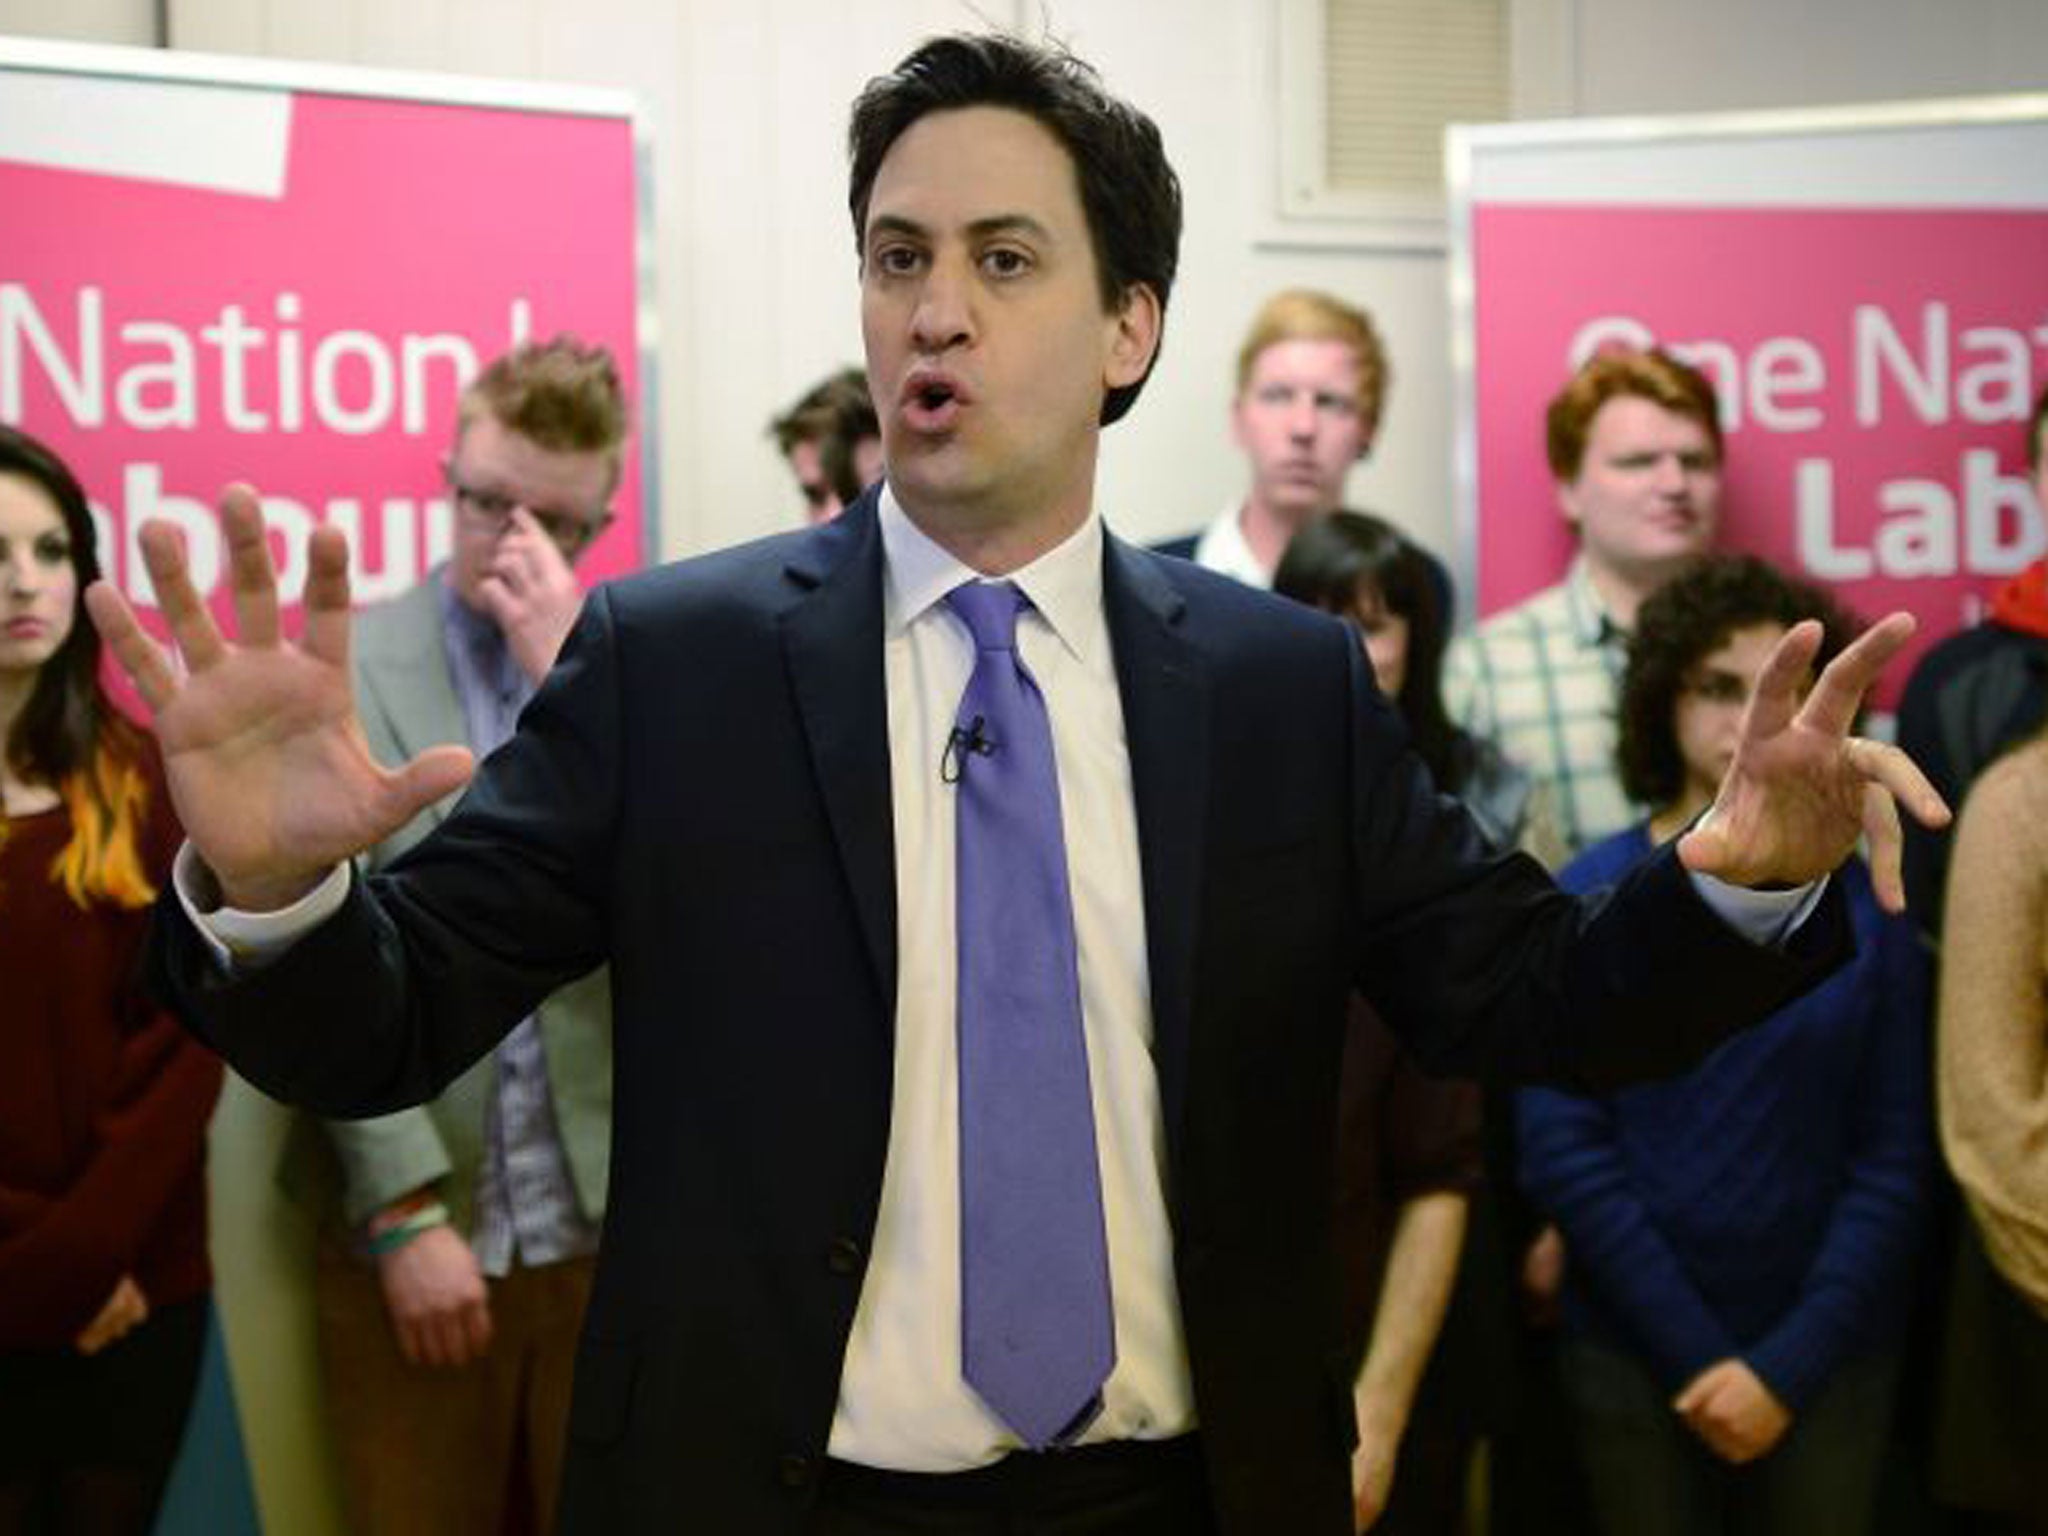 Ed Miliband recently launched the 2013 local election campaign in Ipswich.